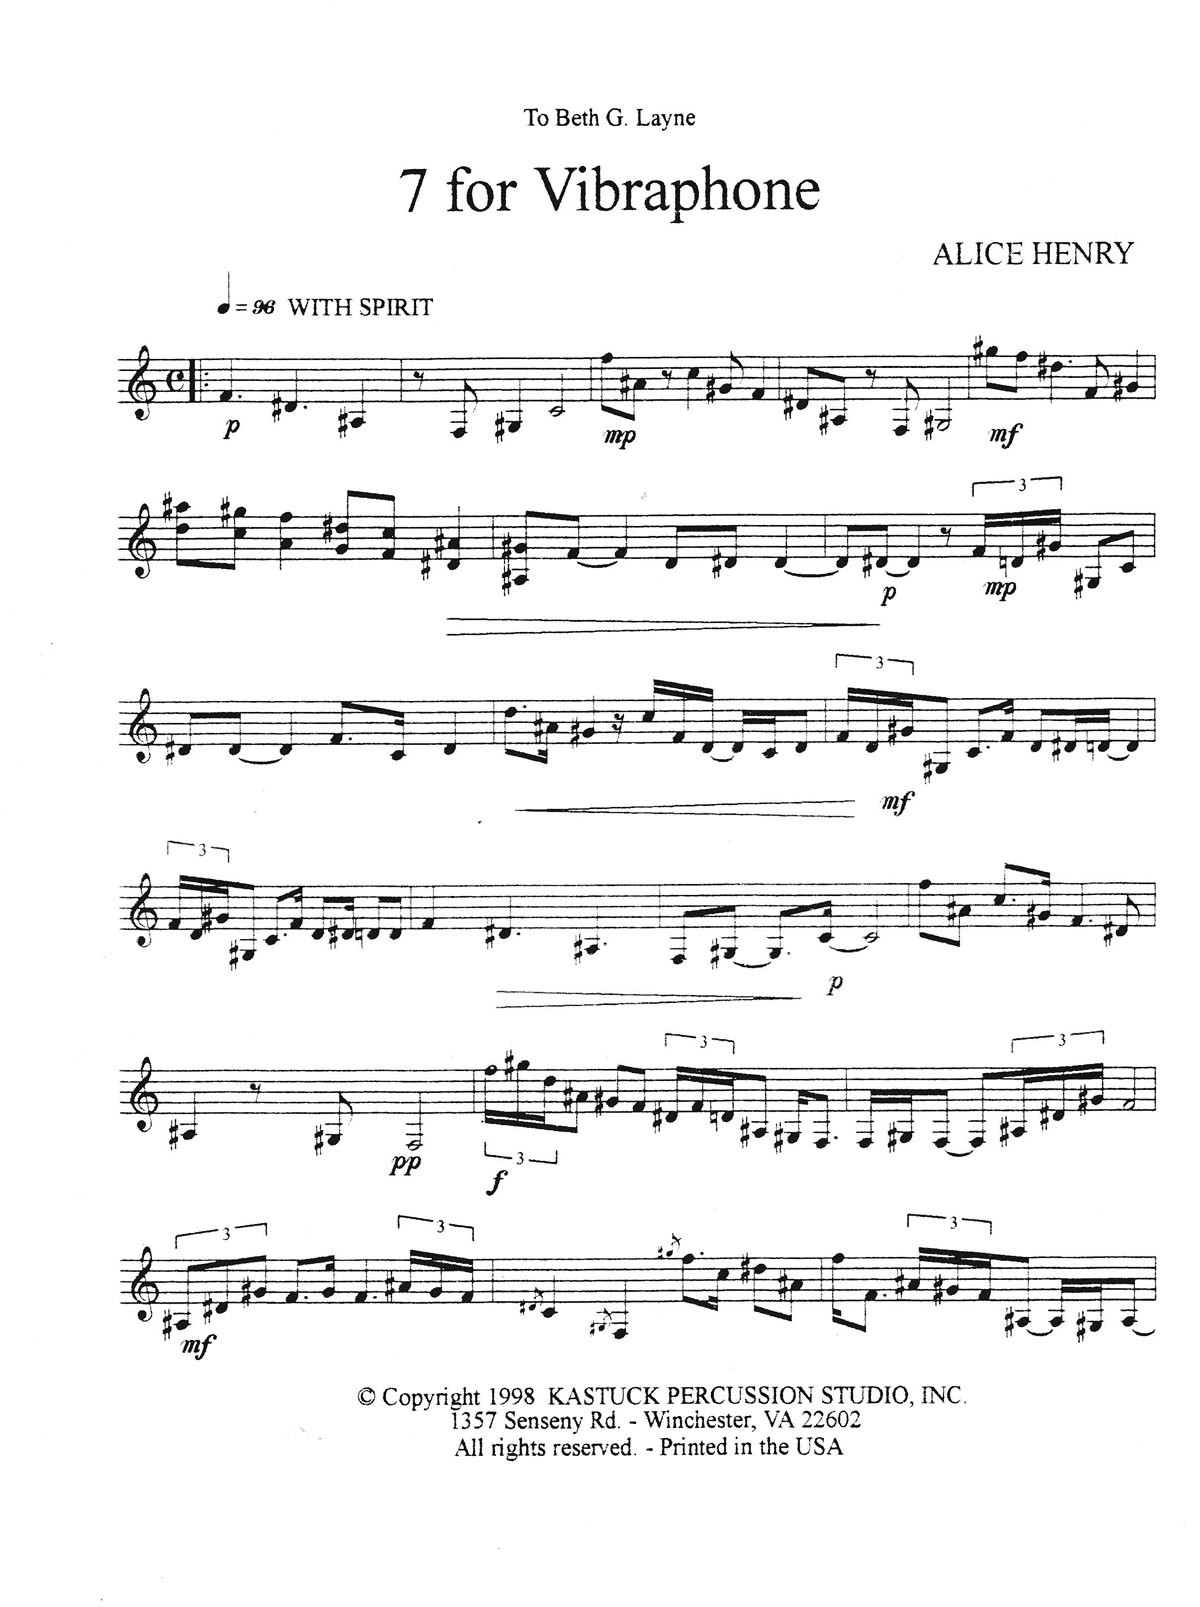 7 for Vibraphone by Alice Henry